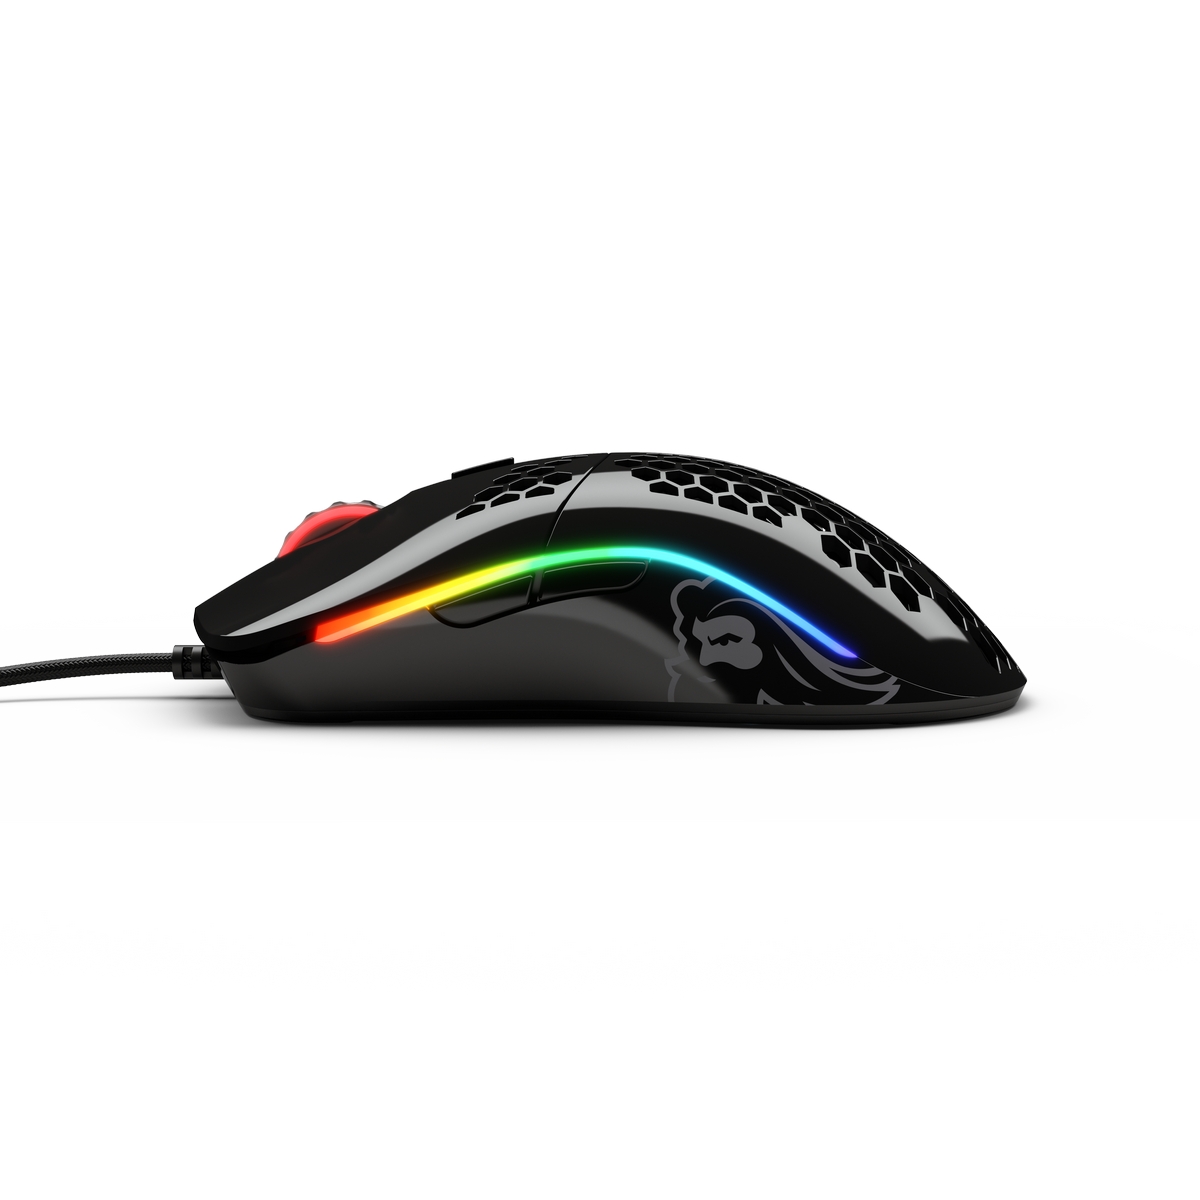  Glorious Gaming Model O Wired Gaming Mouse 67g